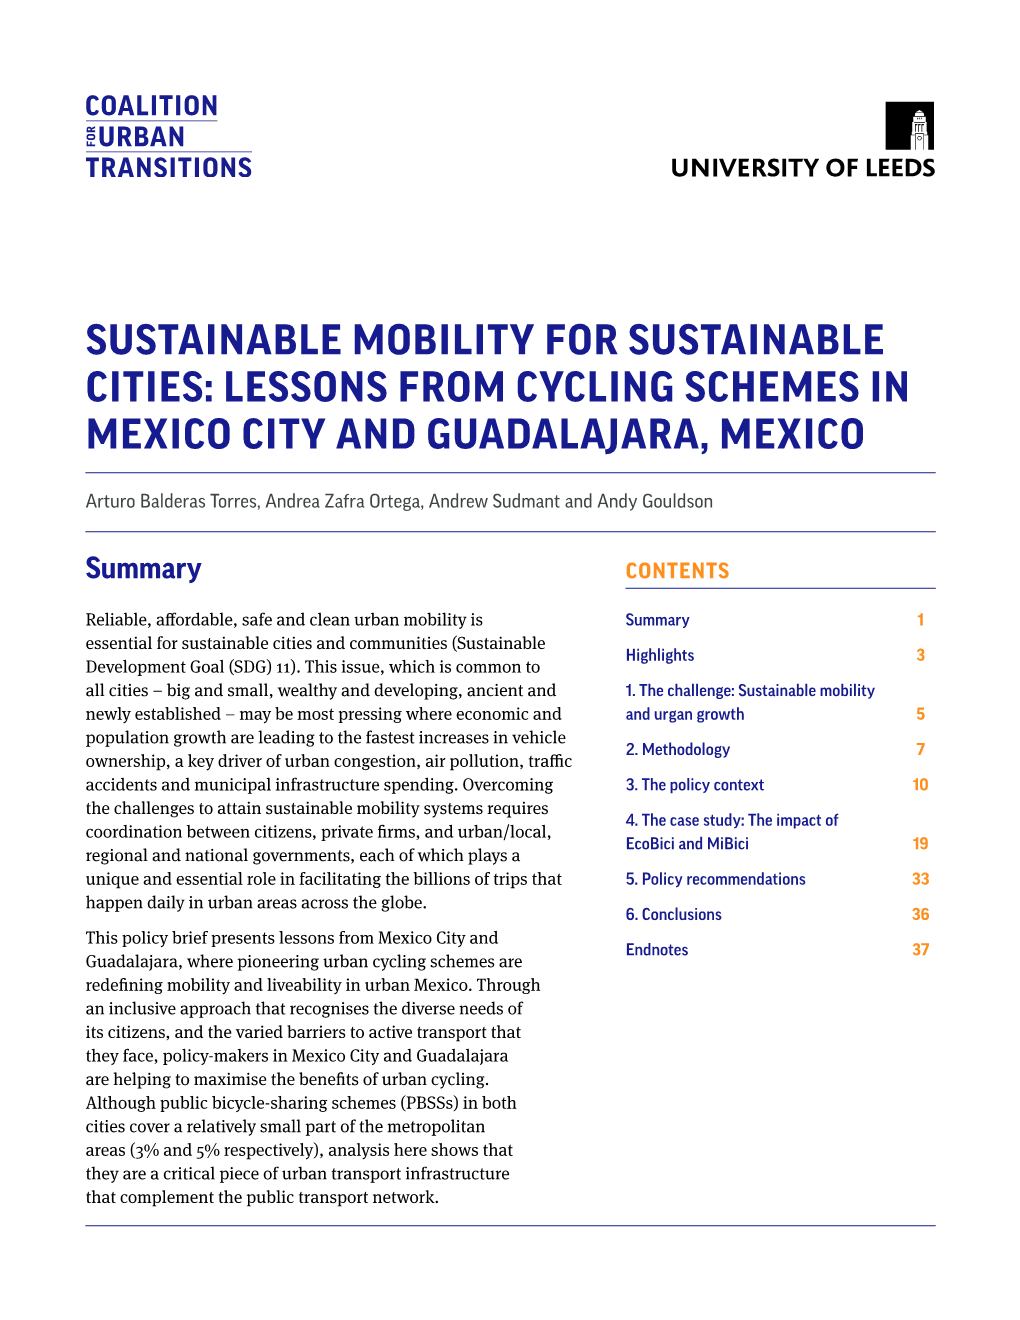 Sustainable Mobility for Sustainable Cities: Lessons from Cycling Schemes in Mexico City and Guadalajara, Mexico